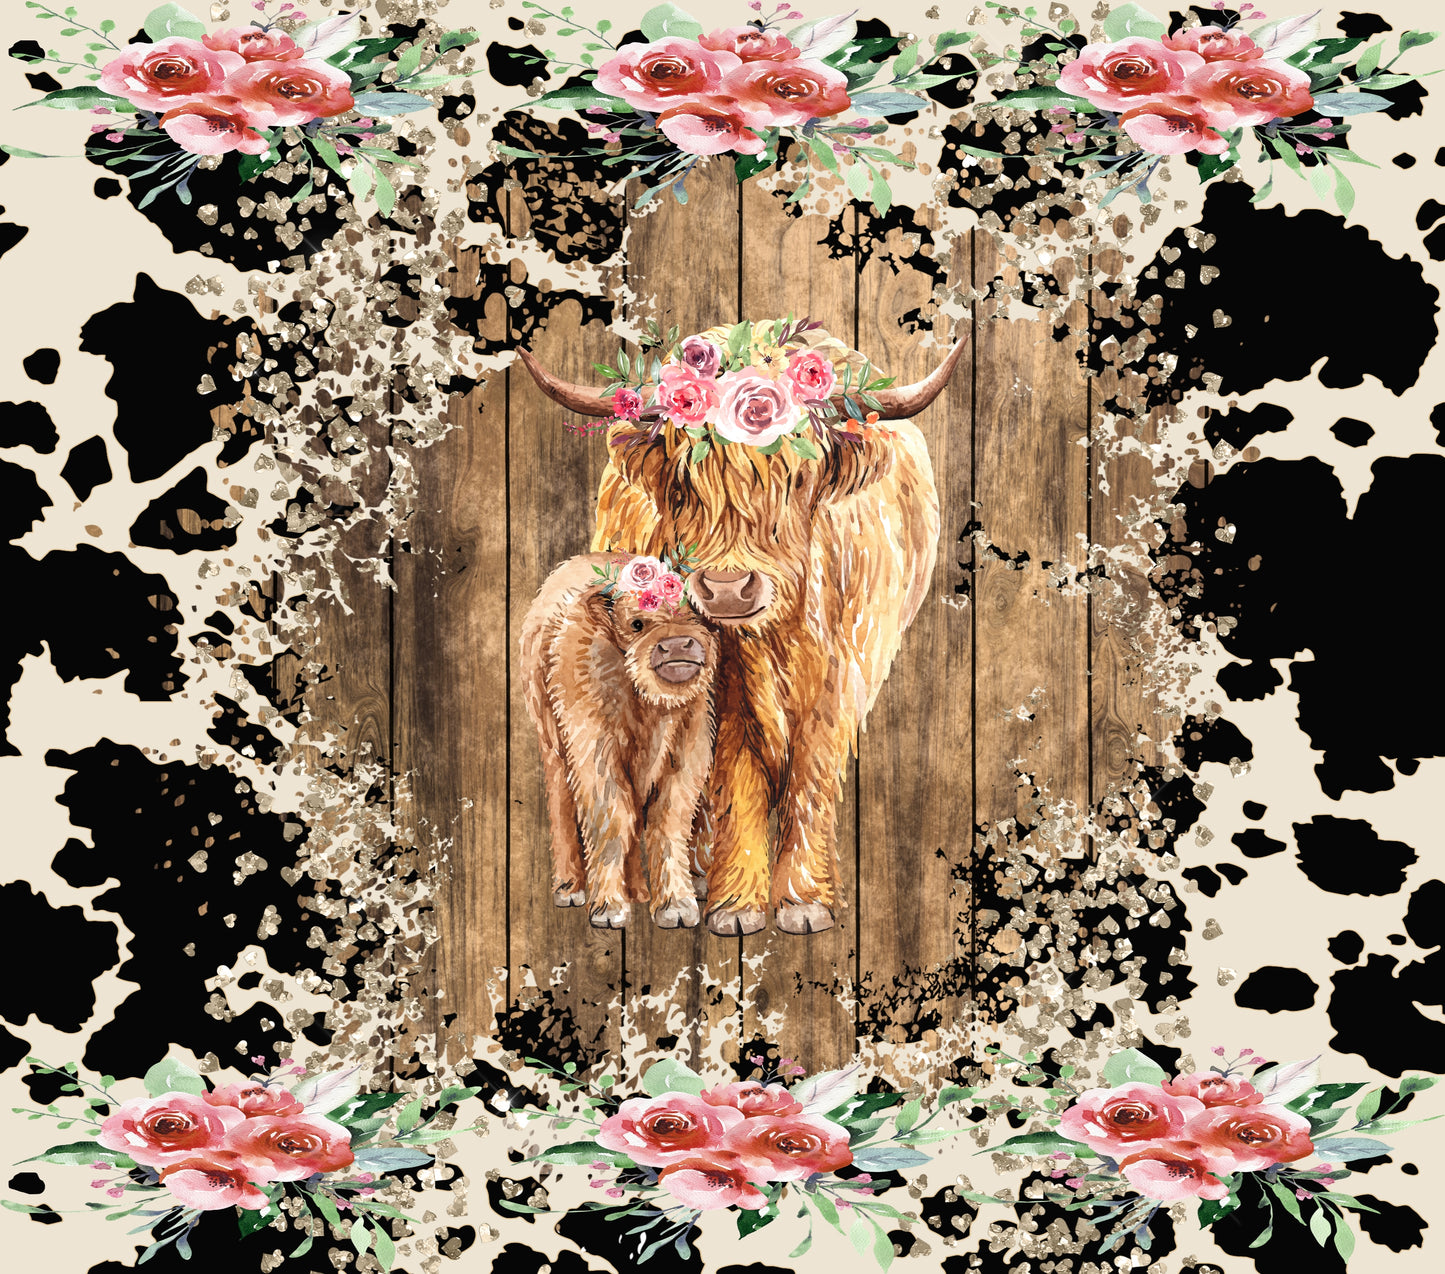 260 2 Brown calves with black a white cow print background